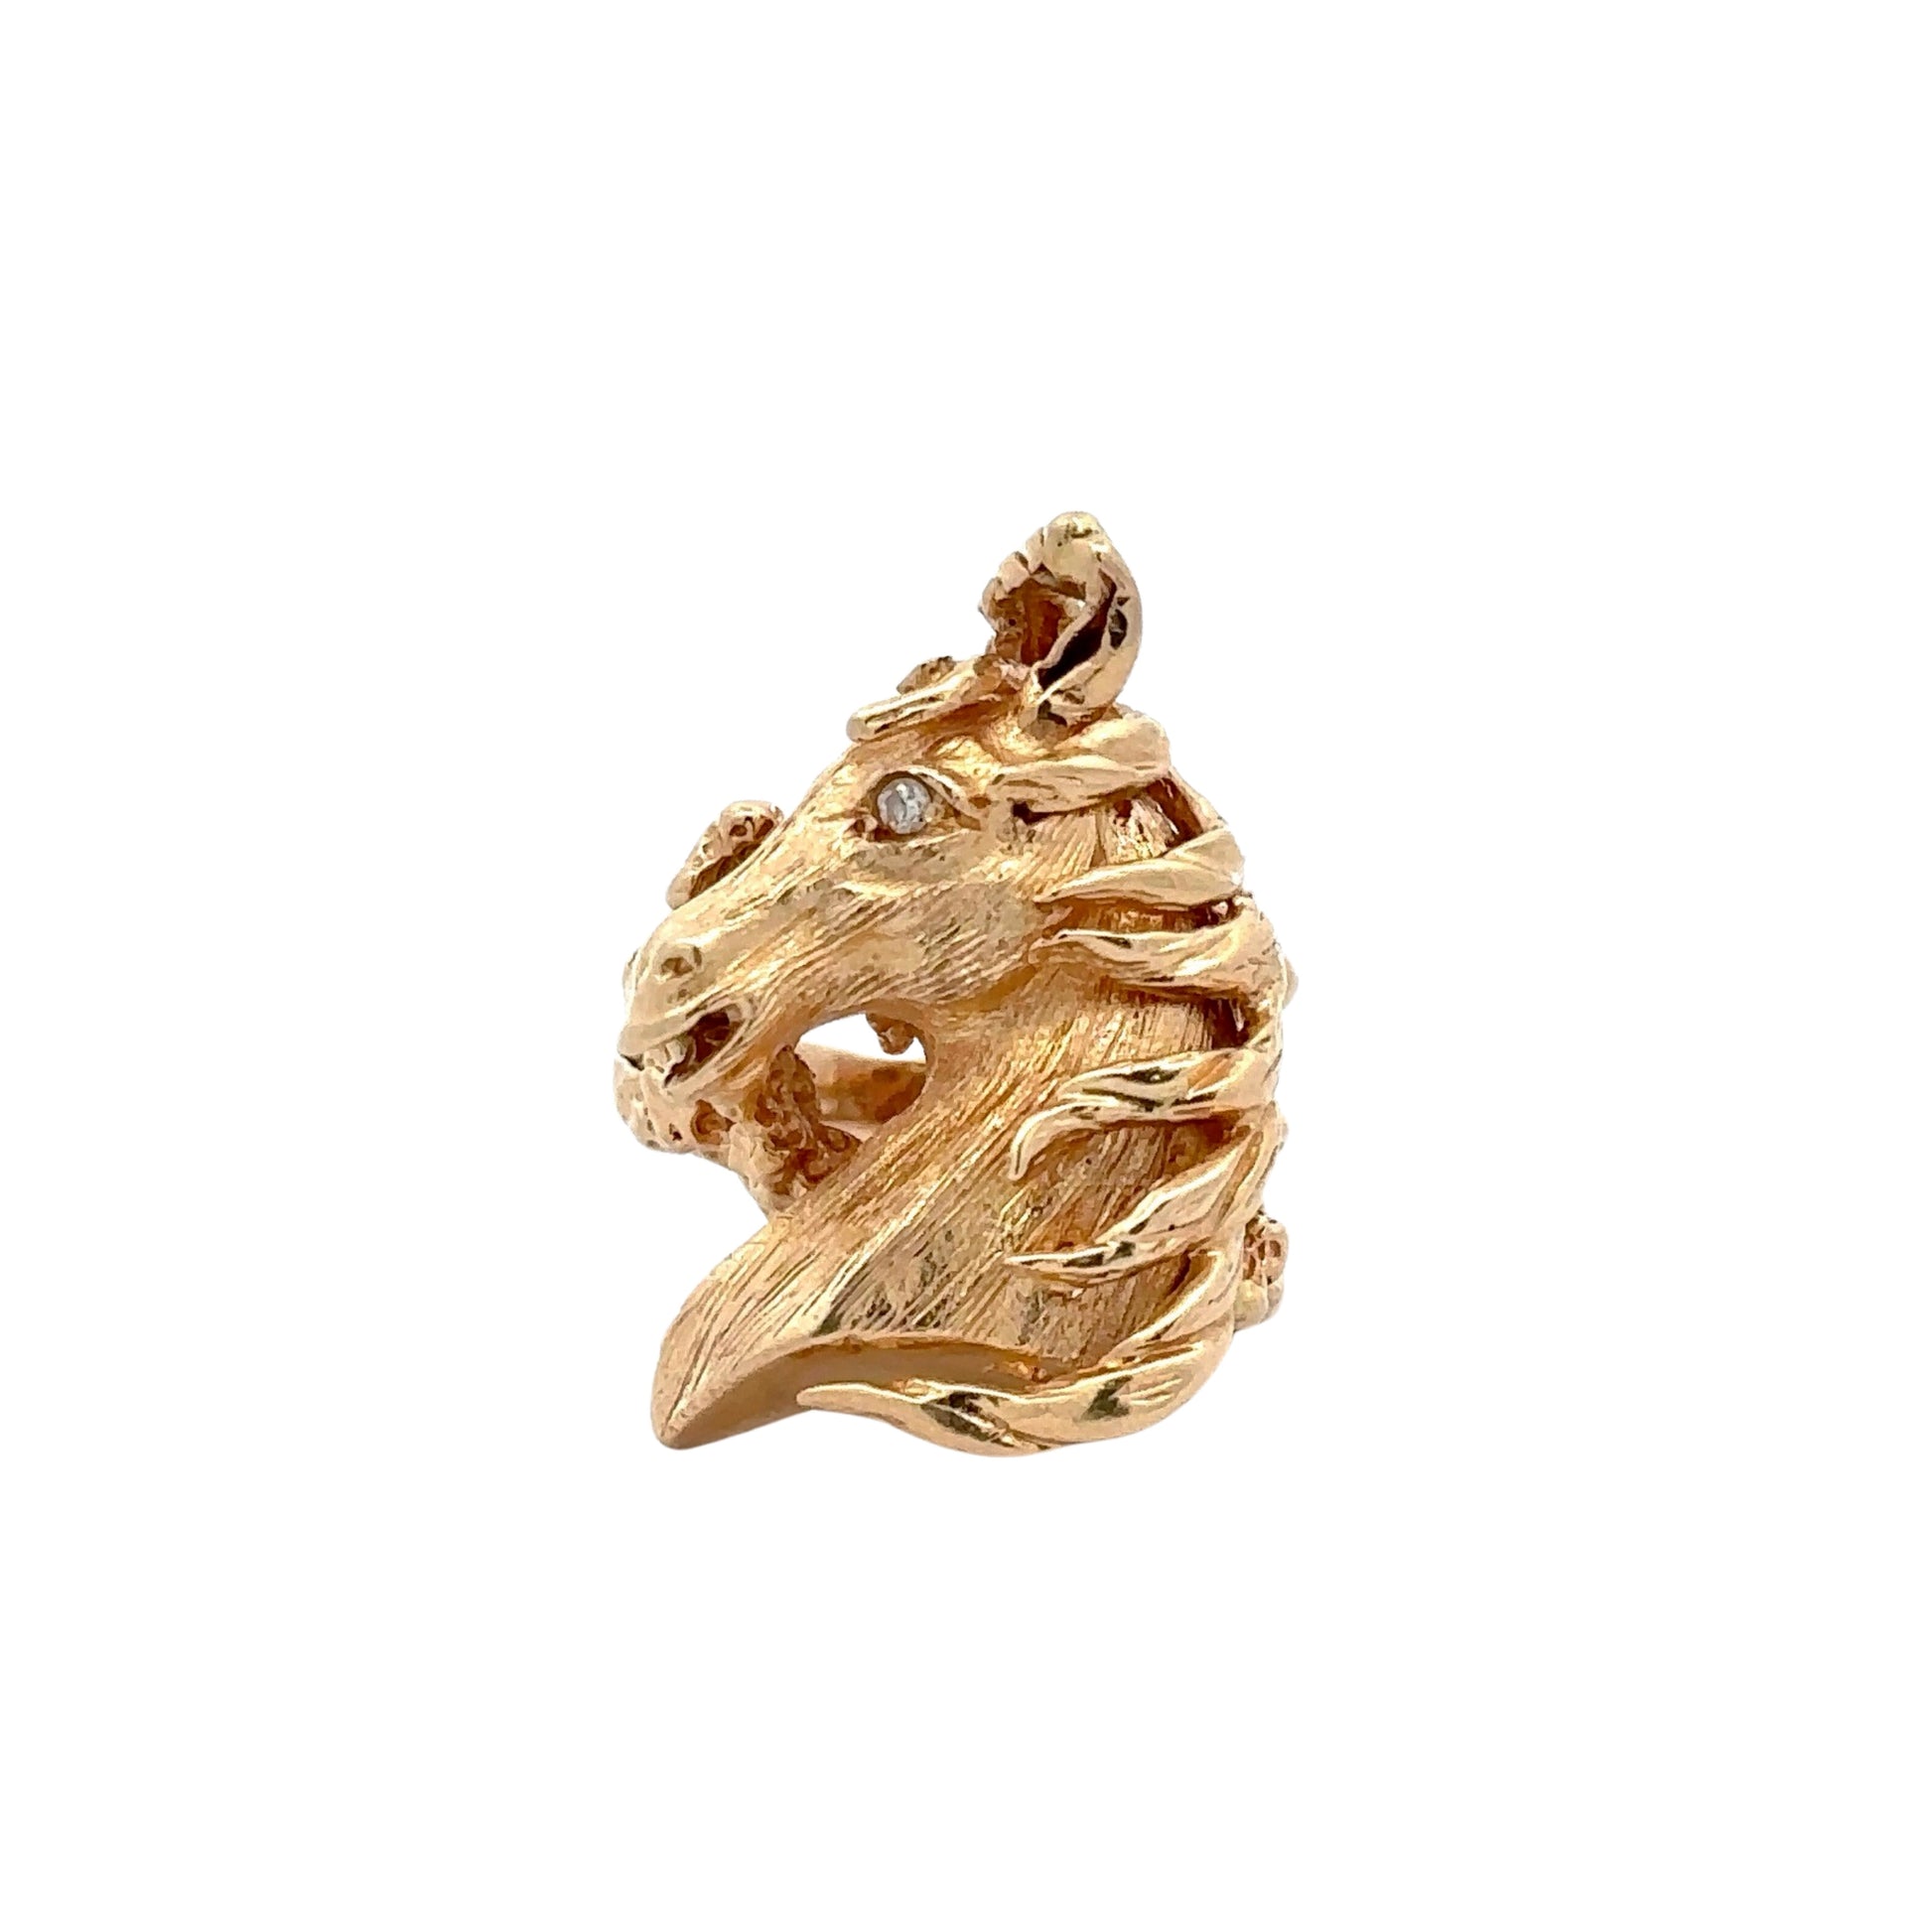 Front of yellow gold horse ring with 1 small round diamond on the eye.